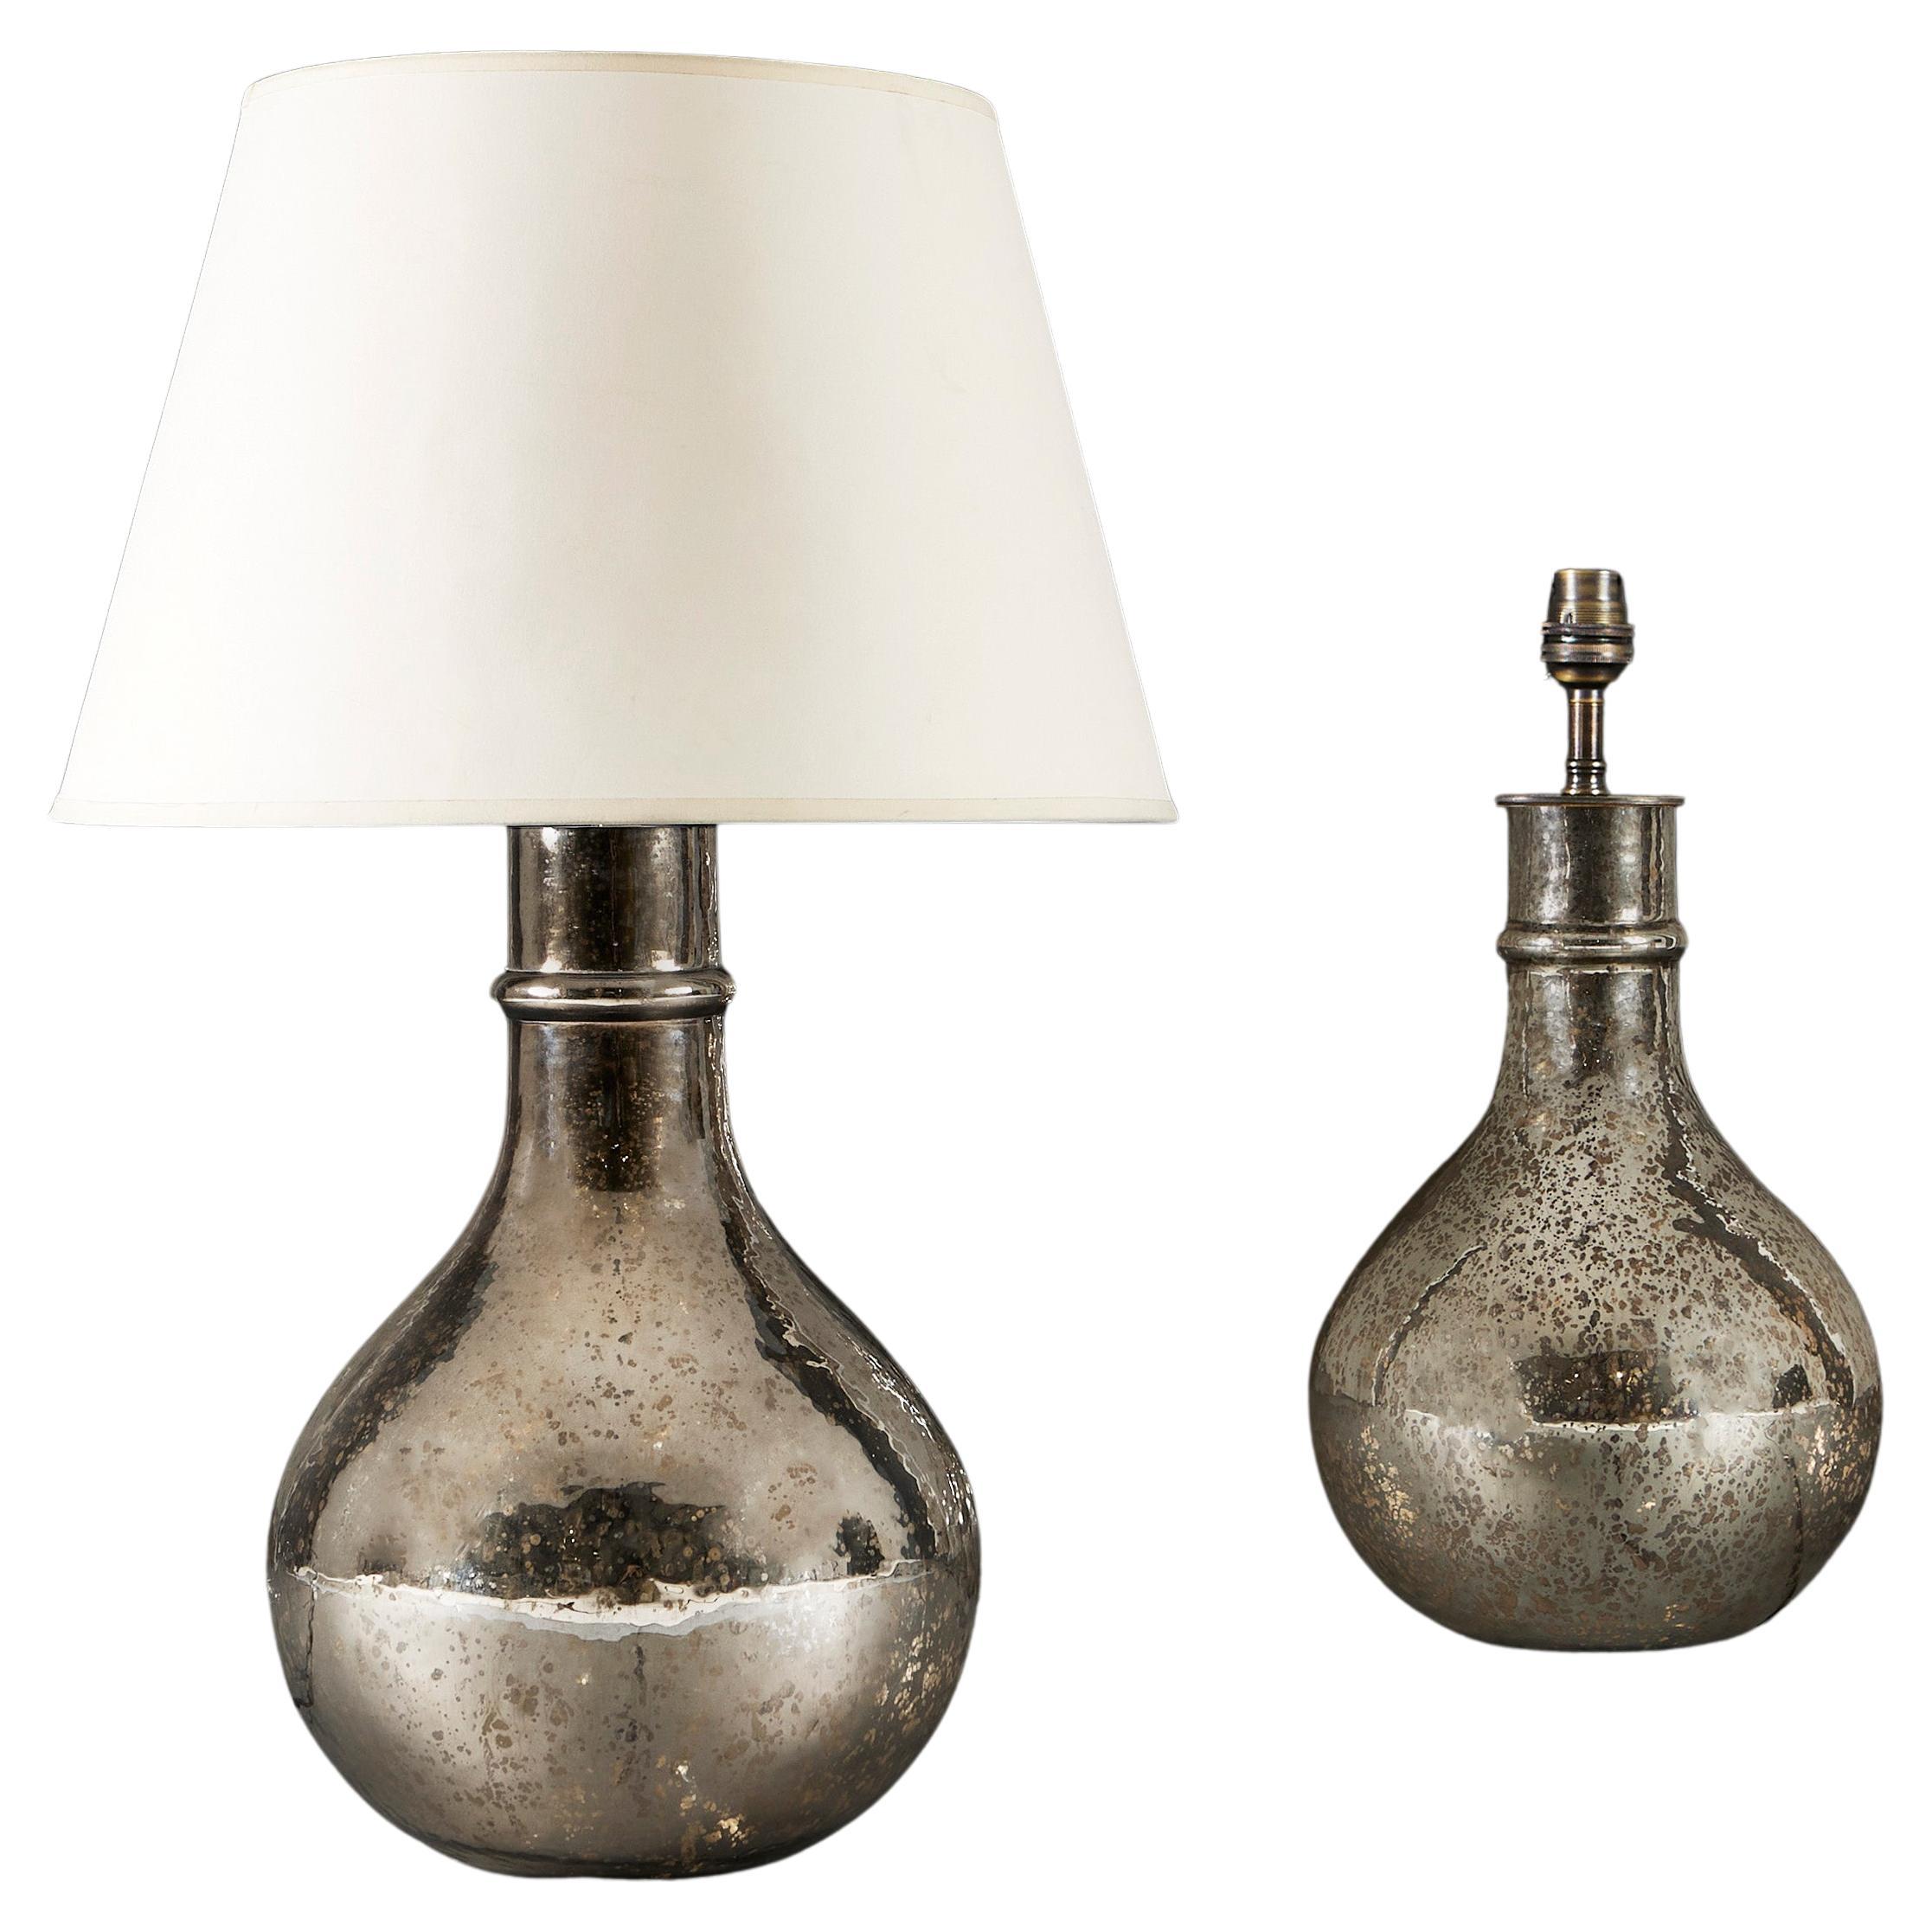 A Pair Of French Mercury Lamps